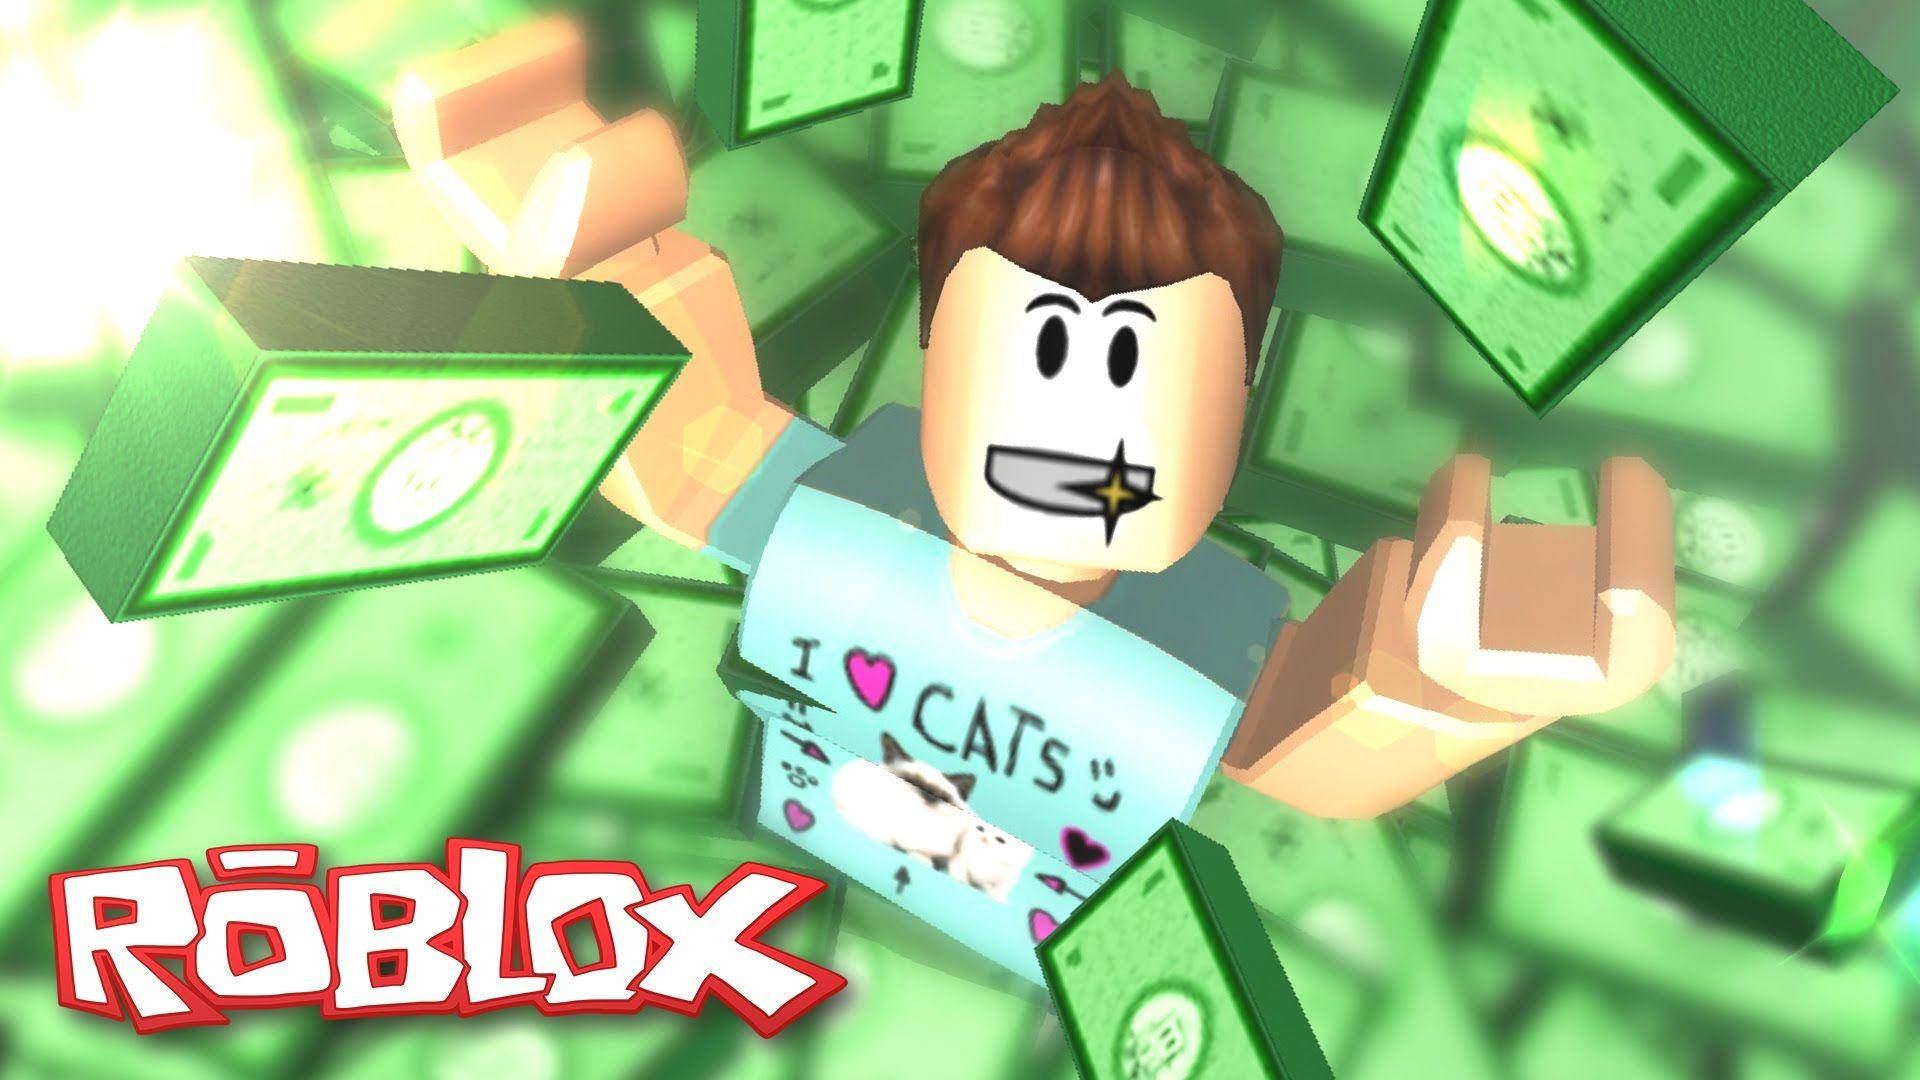 "Cute Roblox - Have Fun With Your Imagination!" Wallpaper